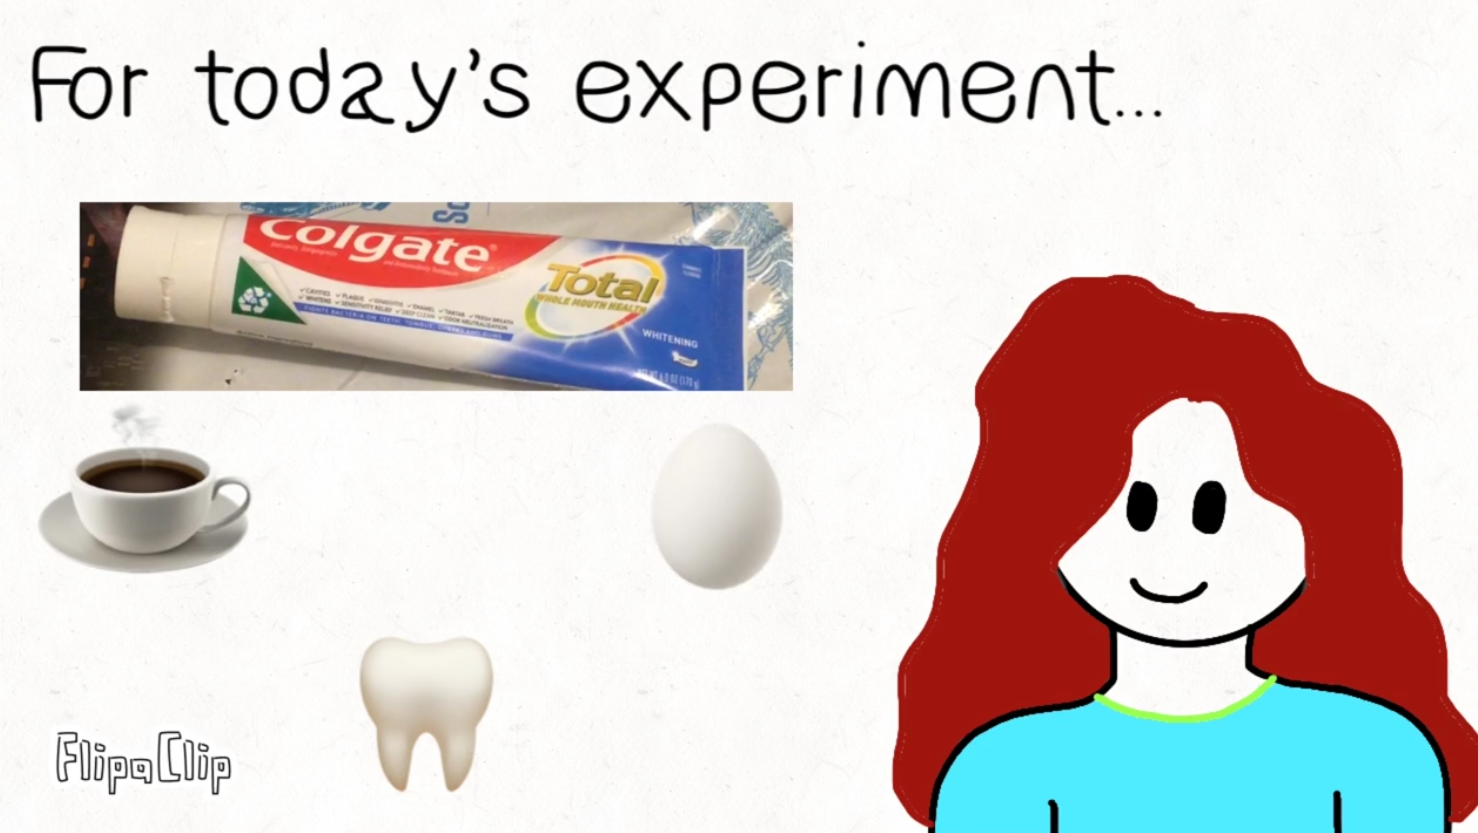 This video shows you the importance of brushing your teeth/how toothpaste works with a demonstration using an egg and coffee.